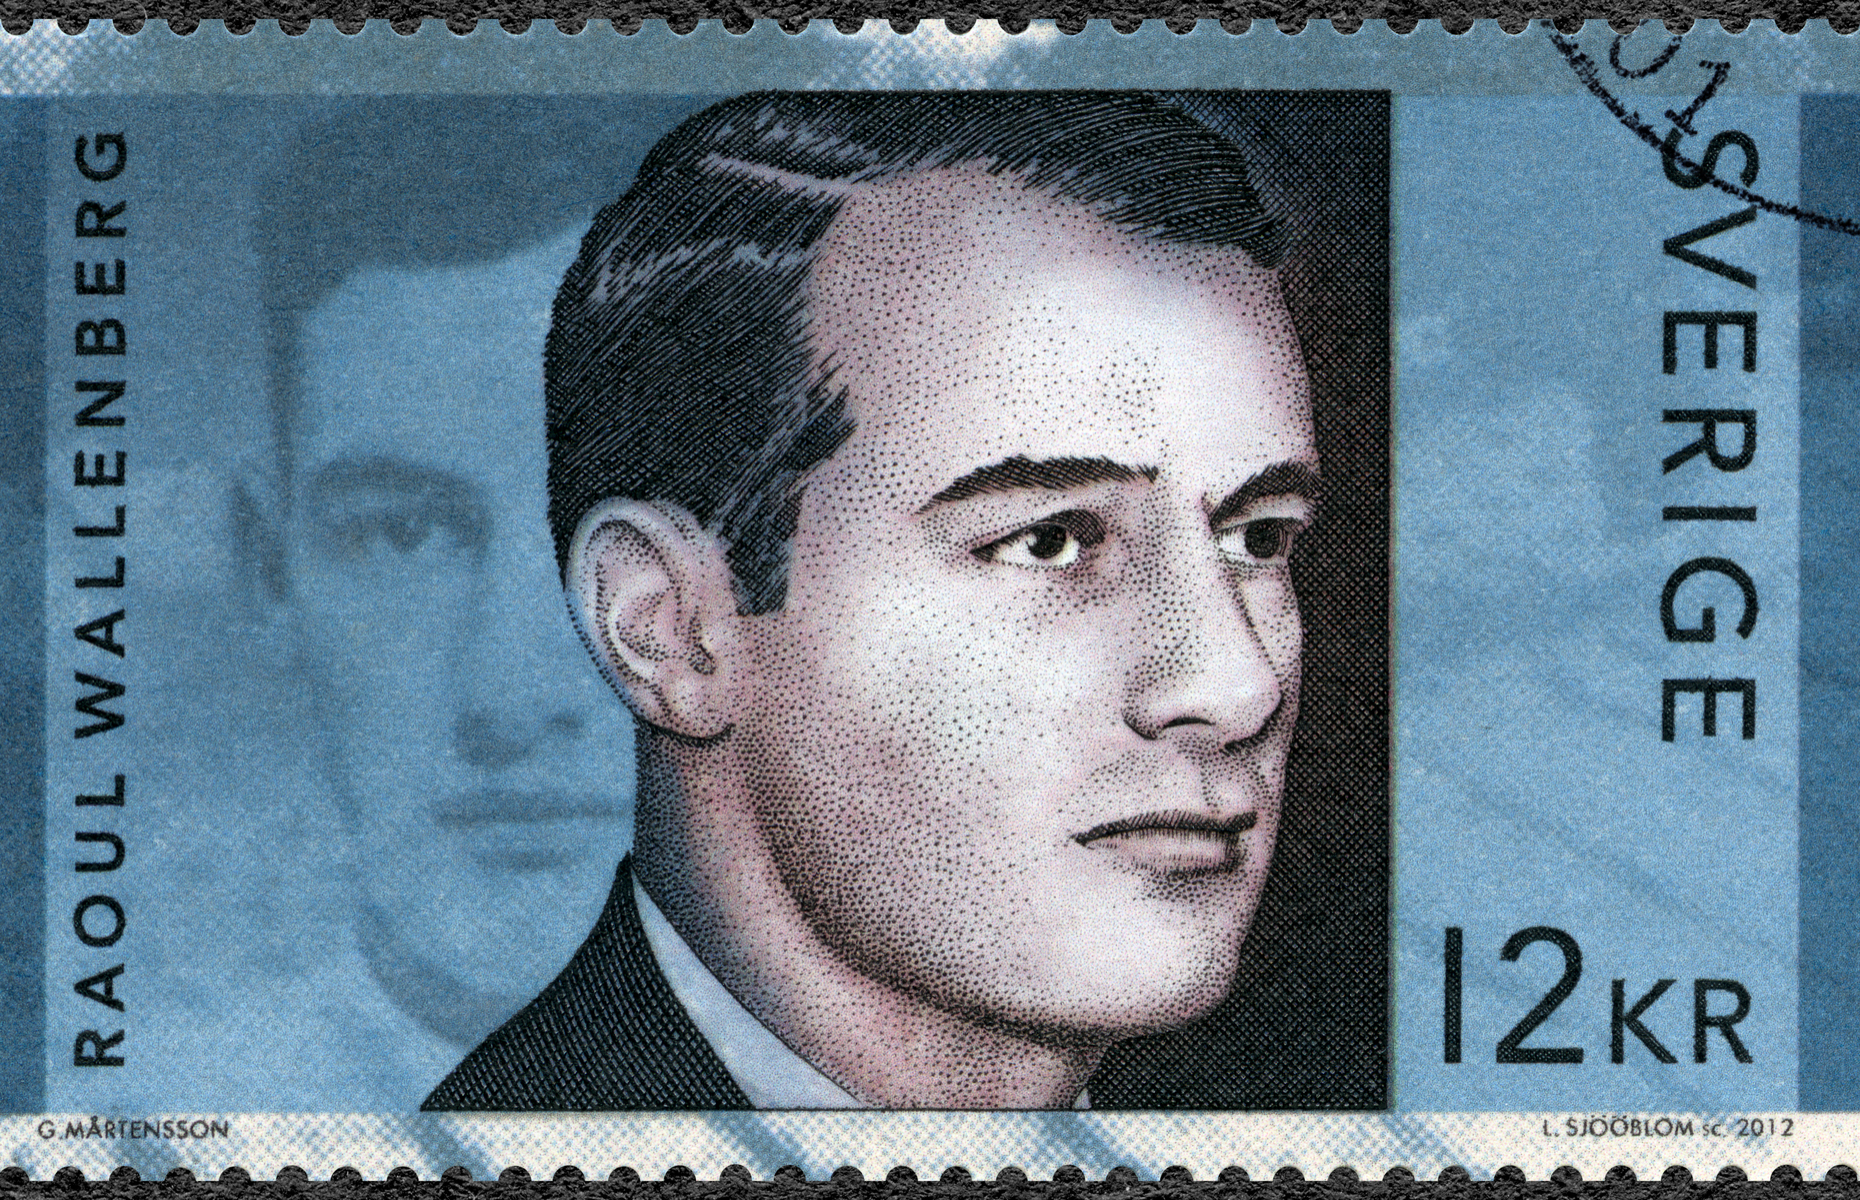 <p>Diplomat Raoul Wallenberg was Sweden’s envoy in Nazi-occupied Hungary during the latter stages of the war. He bought properties in Budapest on behalf of the Swedish government and used the newly acquired “Swedish territory” to shelter thousands of Hungarian Jews until he was able to issue them documents to leave the country and settle in Sweden. In January 1945, as the Soviets occupied Budapest, Wallenberg was arrested for suspected espionage and subsequently disappeared. He is believed to have died in Soviet custody in 1947, although his body was never found. Sweden declared him legally dead in 2016.</p>